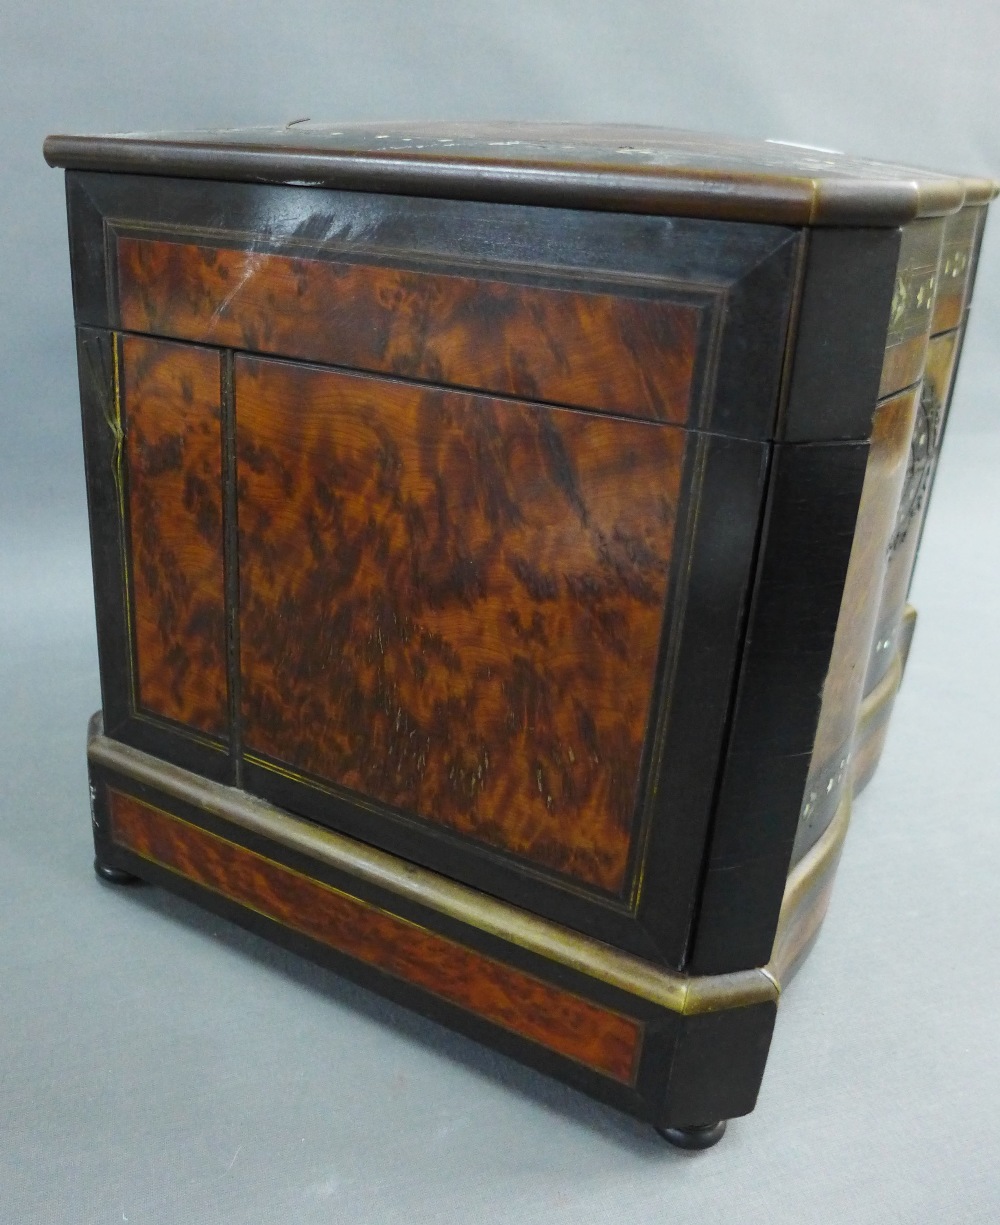 19th century burr walnut, brass and abalone inlaid decanter box, with a hinged top and fold out - Image 3 of 4